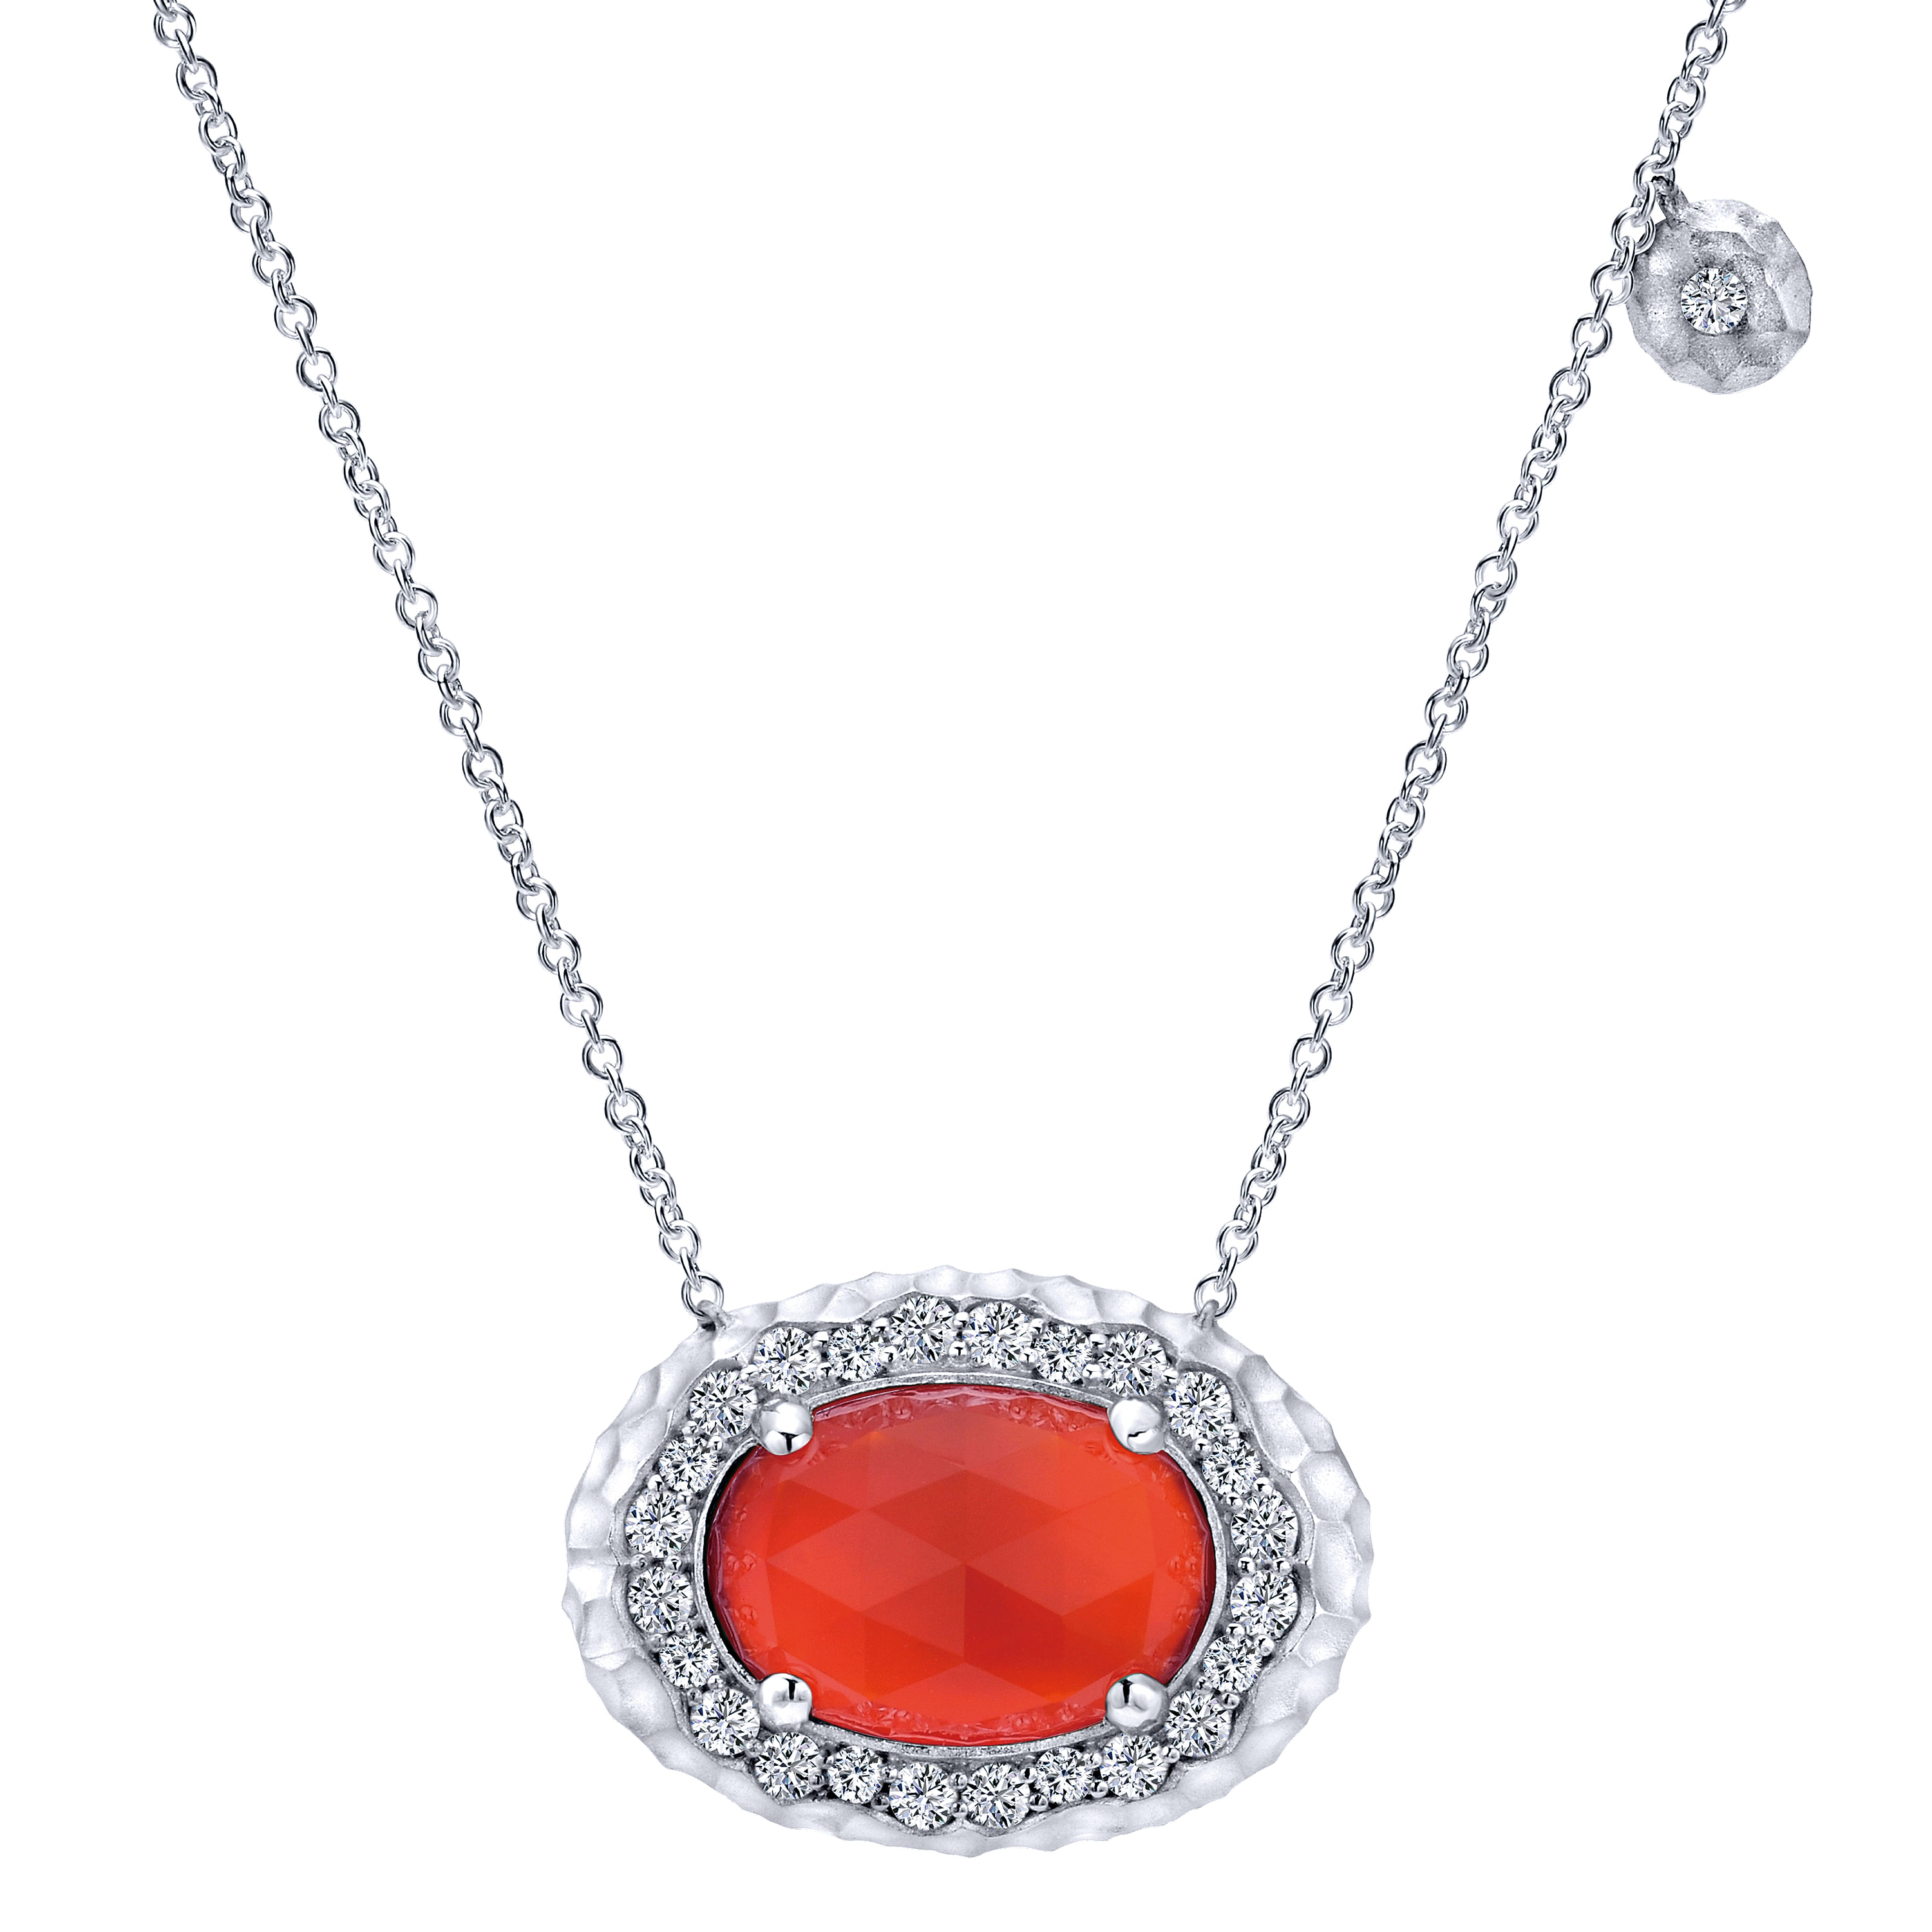 925 Sterling Silver Rock Crystal and Red Onyx Pendant Necklace with White Sapphire Halo